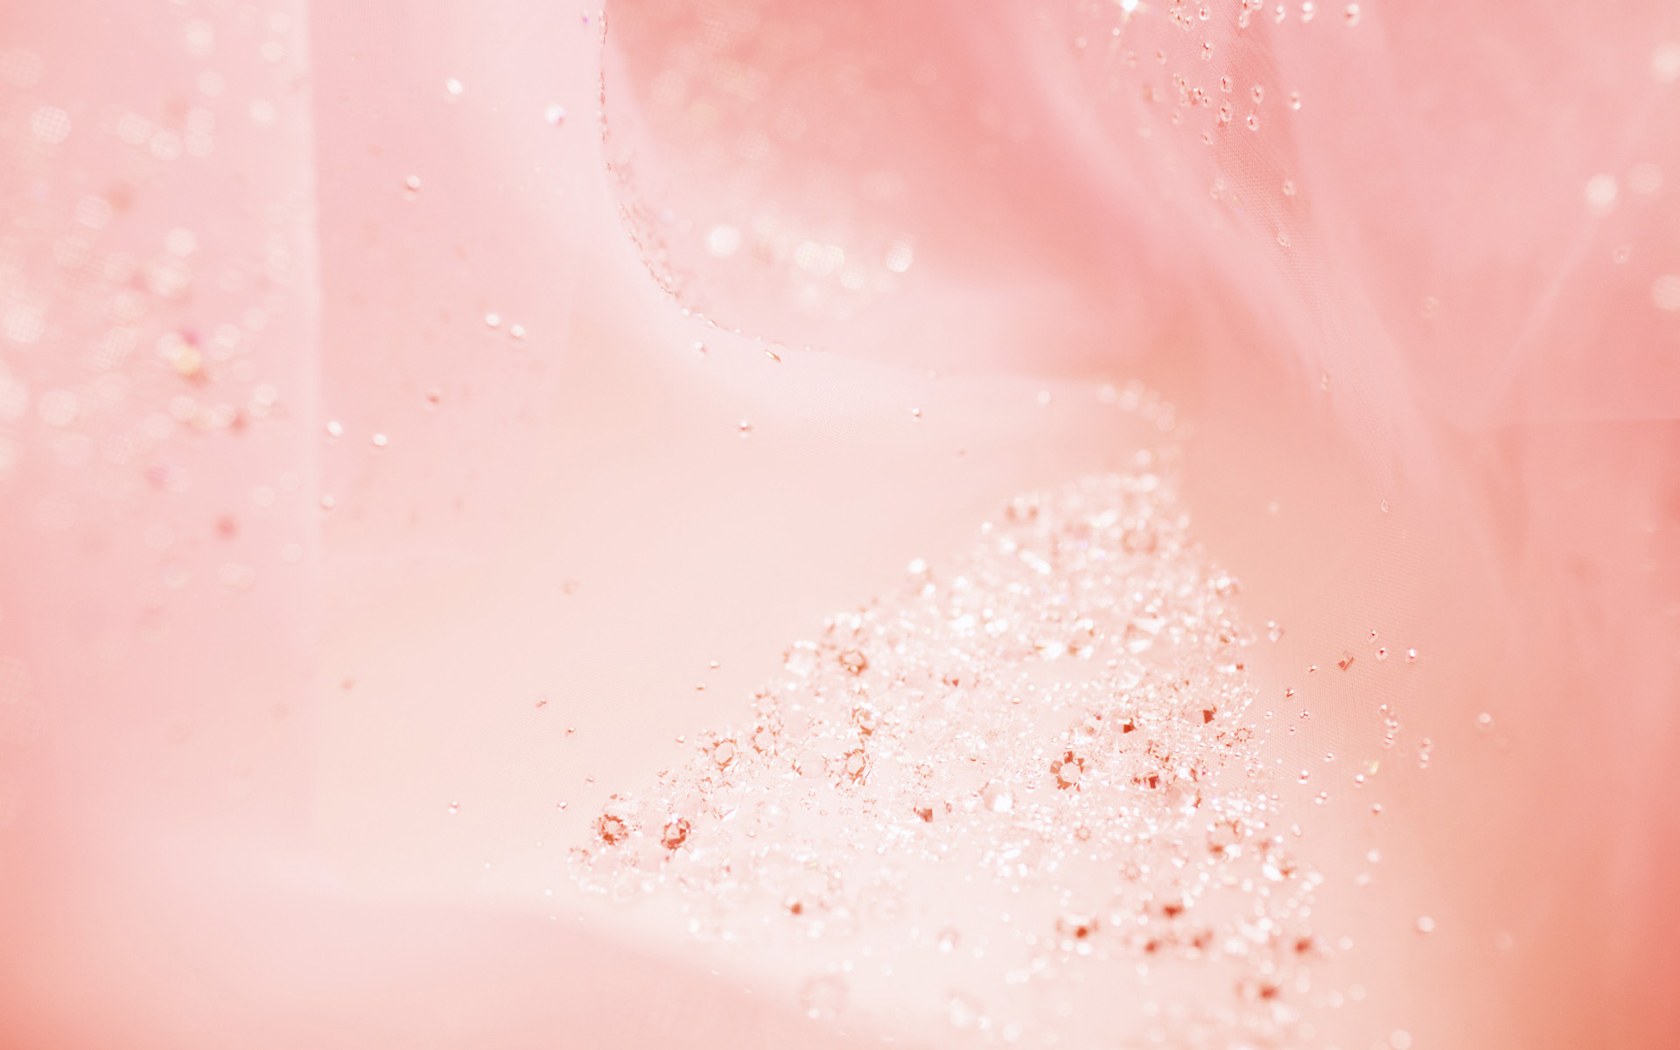  and Crystals   Romantic Sparkling Backgrounds 16801050 NO6 Wallpaper